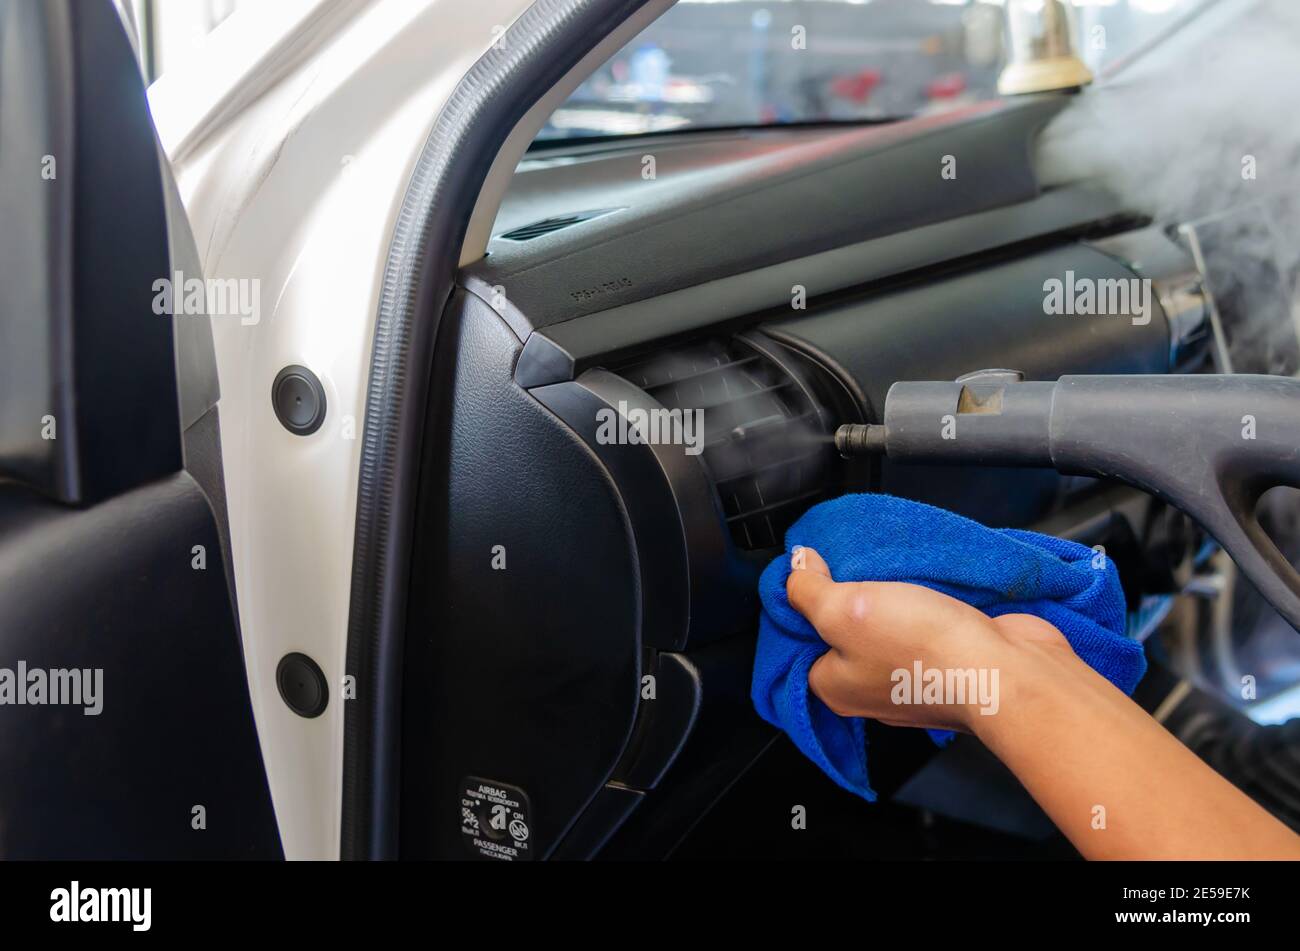 Steam cleaning in the car's air vents. Use high heat steam to kill germs to clean at the car service. Stock Photo